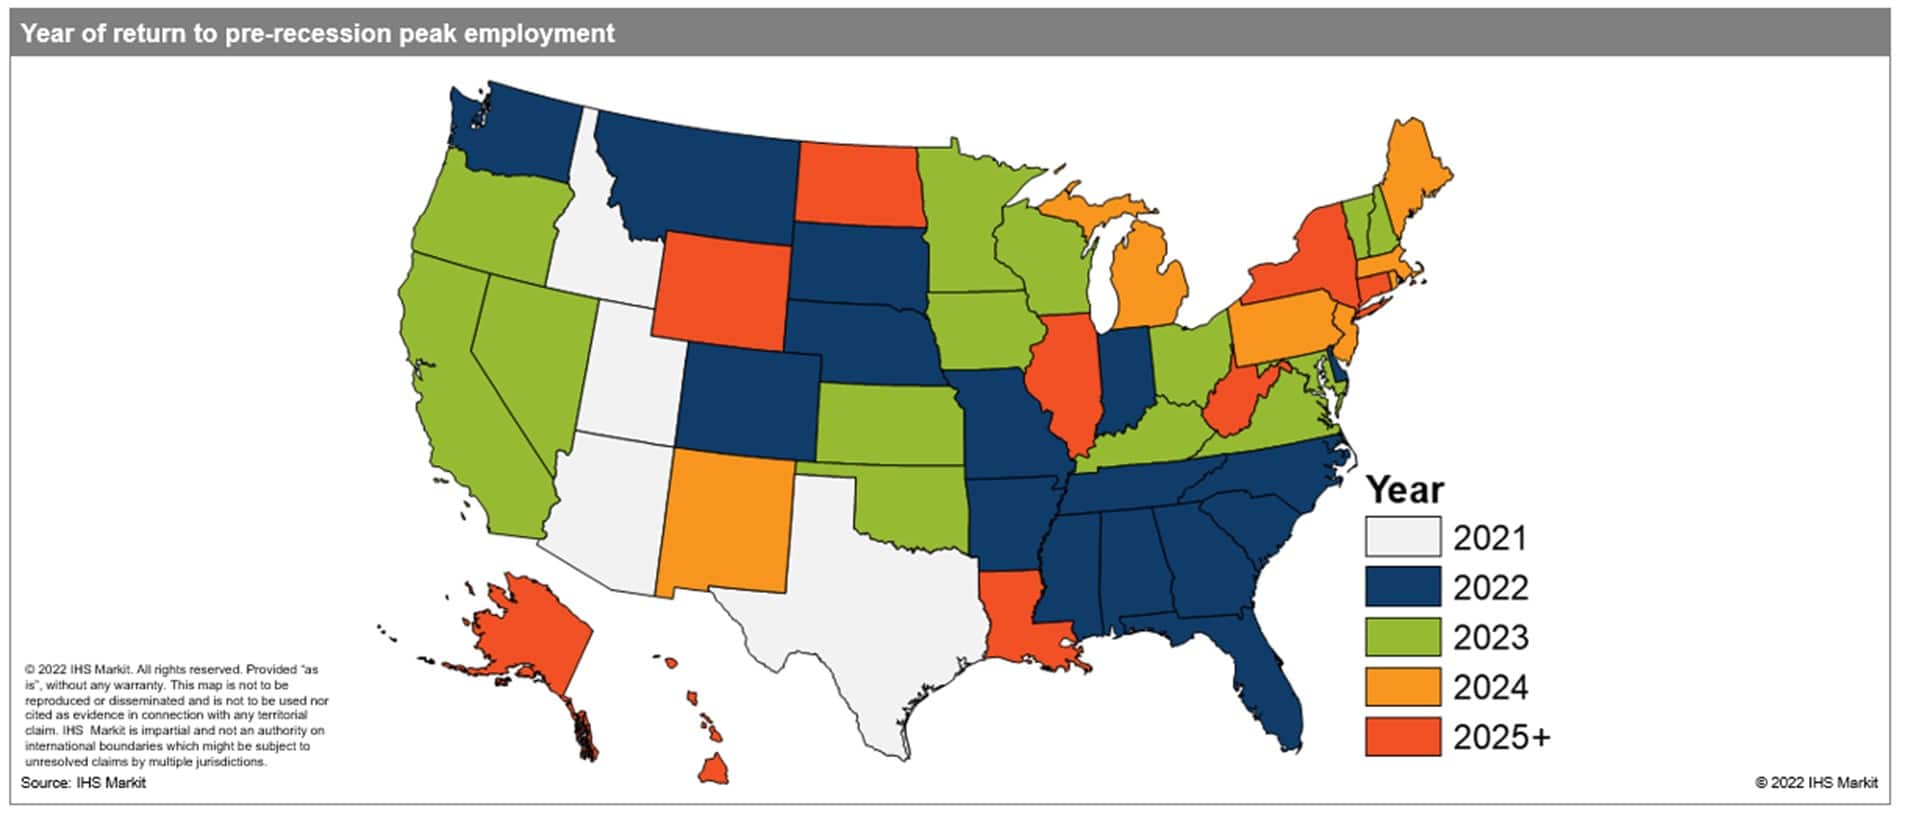 Map of the US year of return to pre-recession peak employment